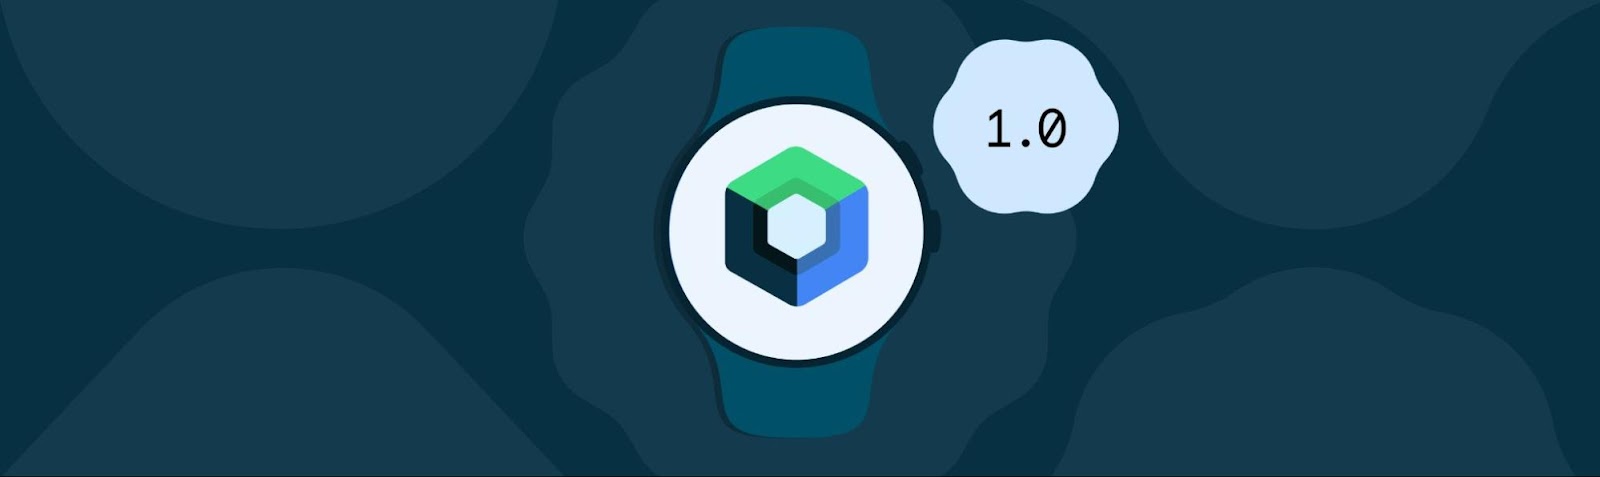 Our app is show as enhanced by developer for wear OS on google